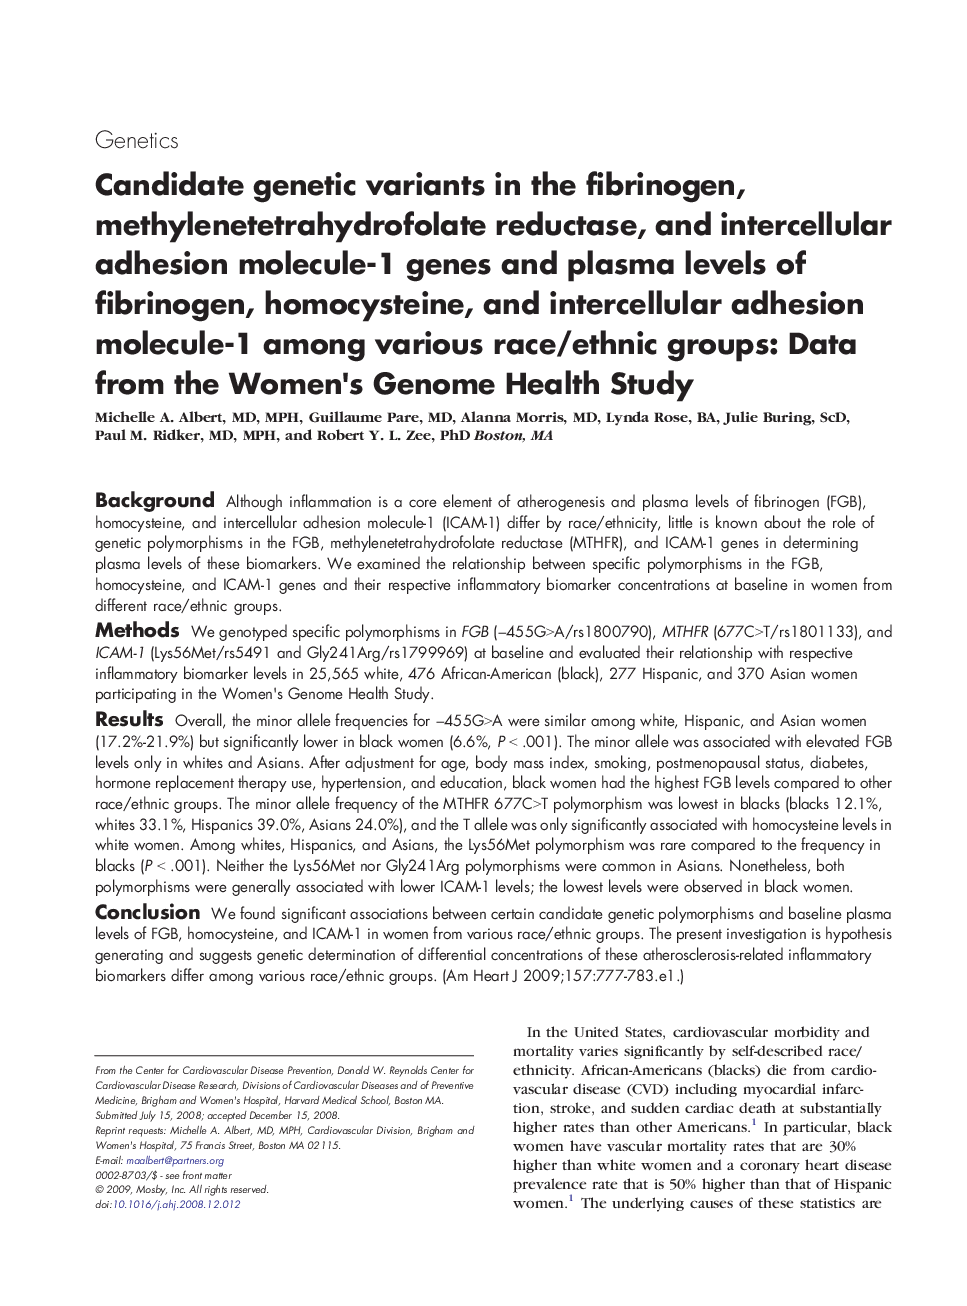 Candidate genetic variants in the fibrinogen, methylenetetrahydrofolate reductase, and intercellular adhesion molecule-1 genes and plasma levels of fibrinogen, homocysteine, and intercellular adhesion molecule-1 among various race/ethnic groups: Data from